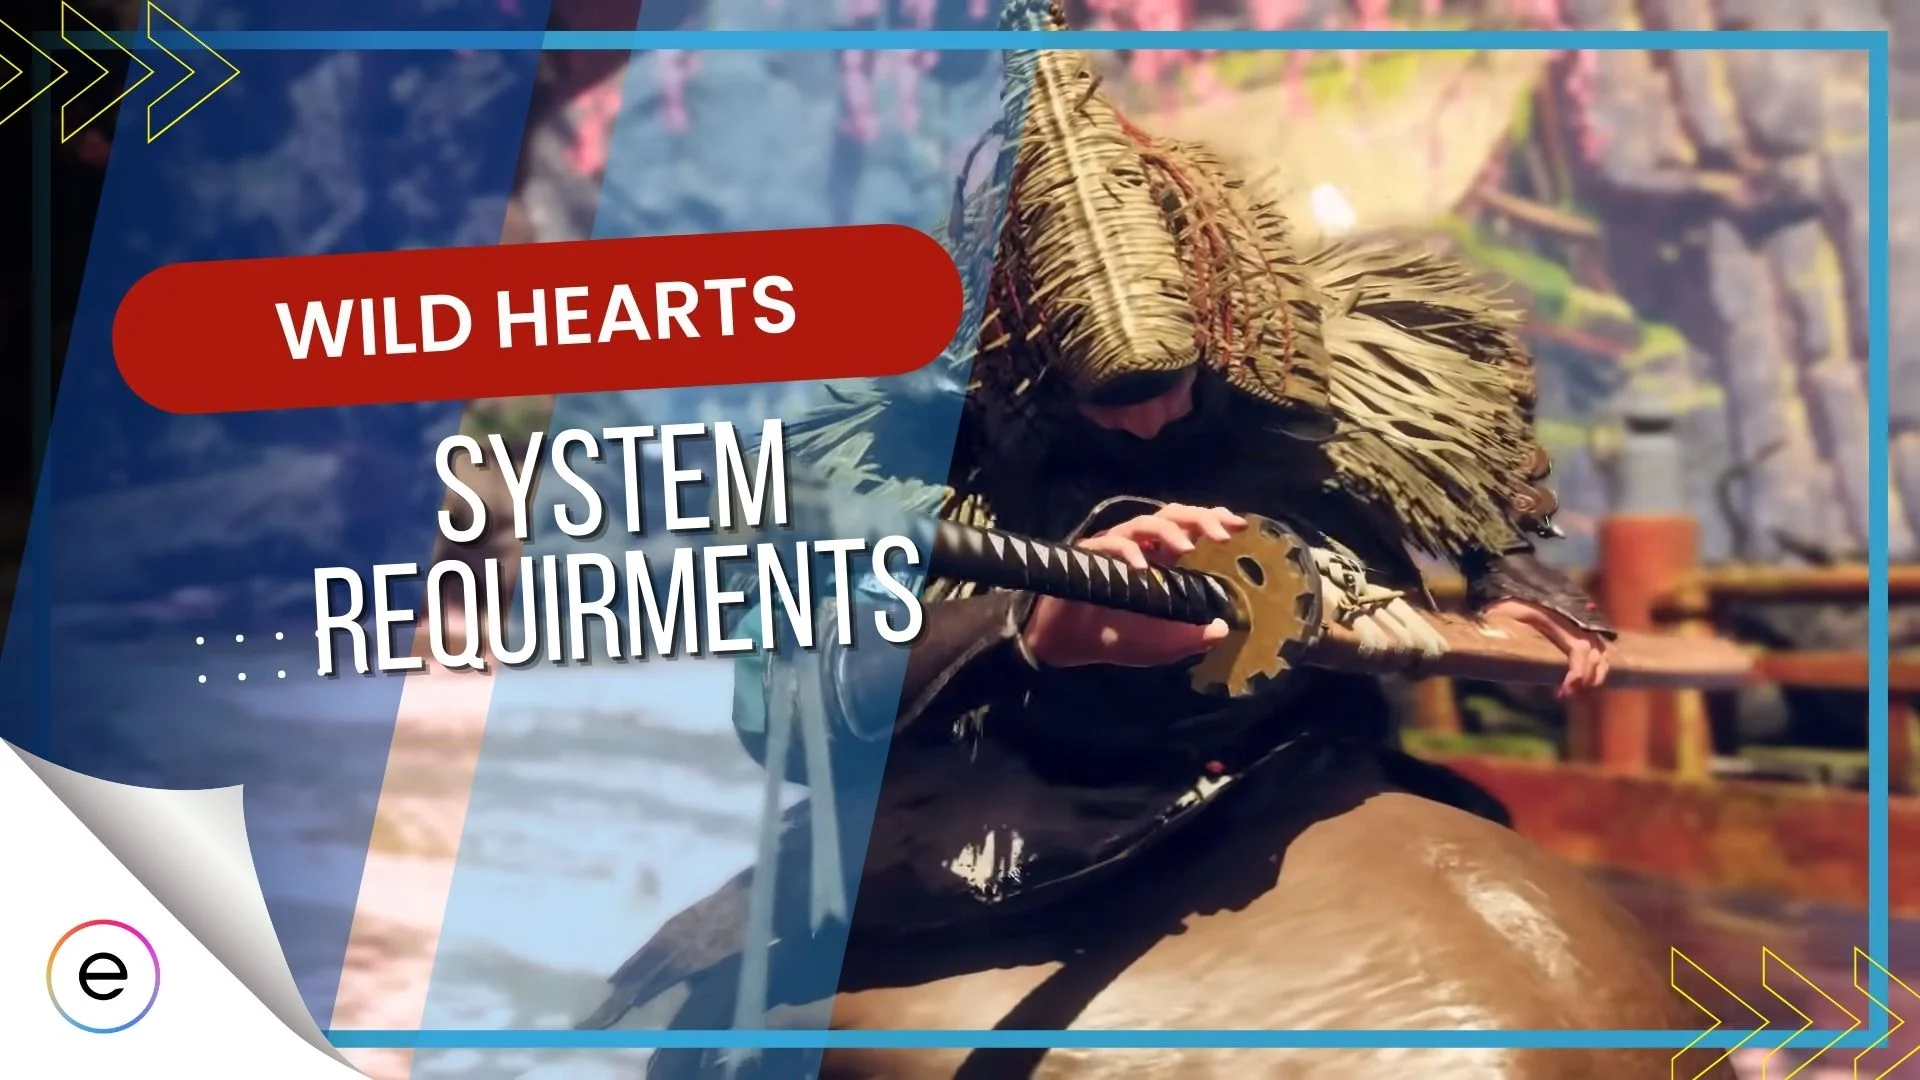 WILD HEARTS shares PC requirements and worldwide release schedules